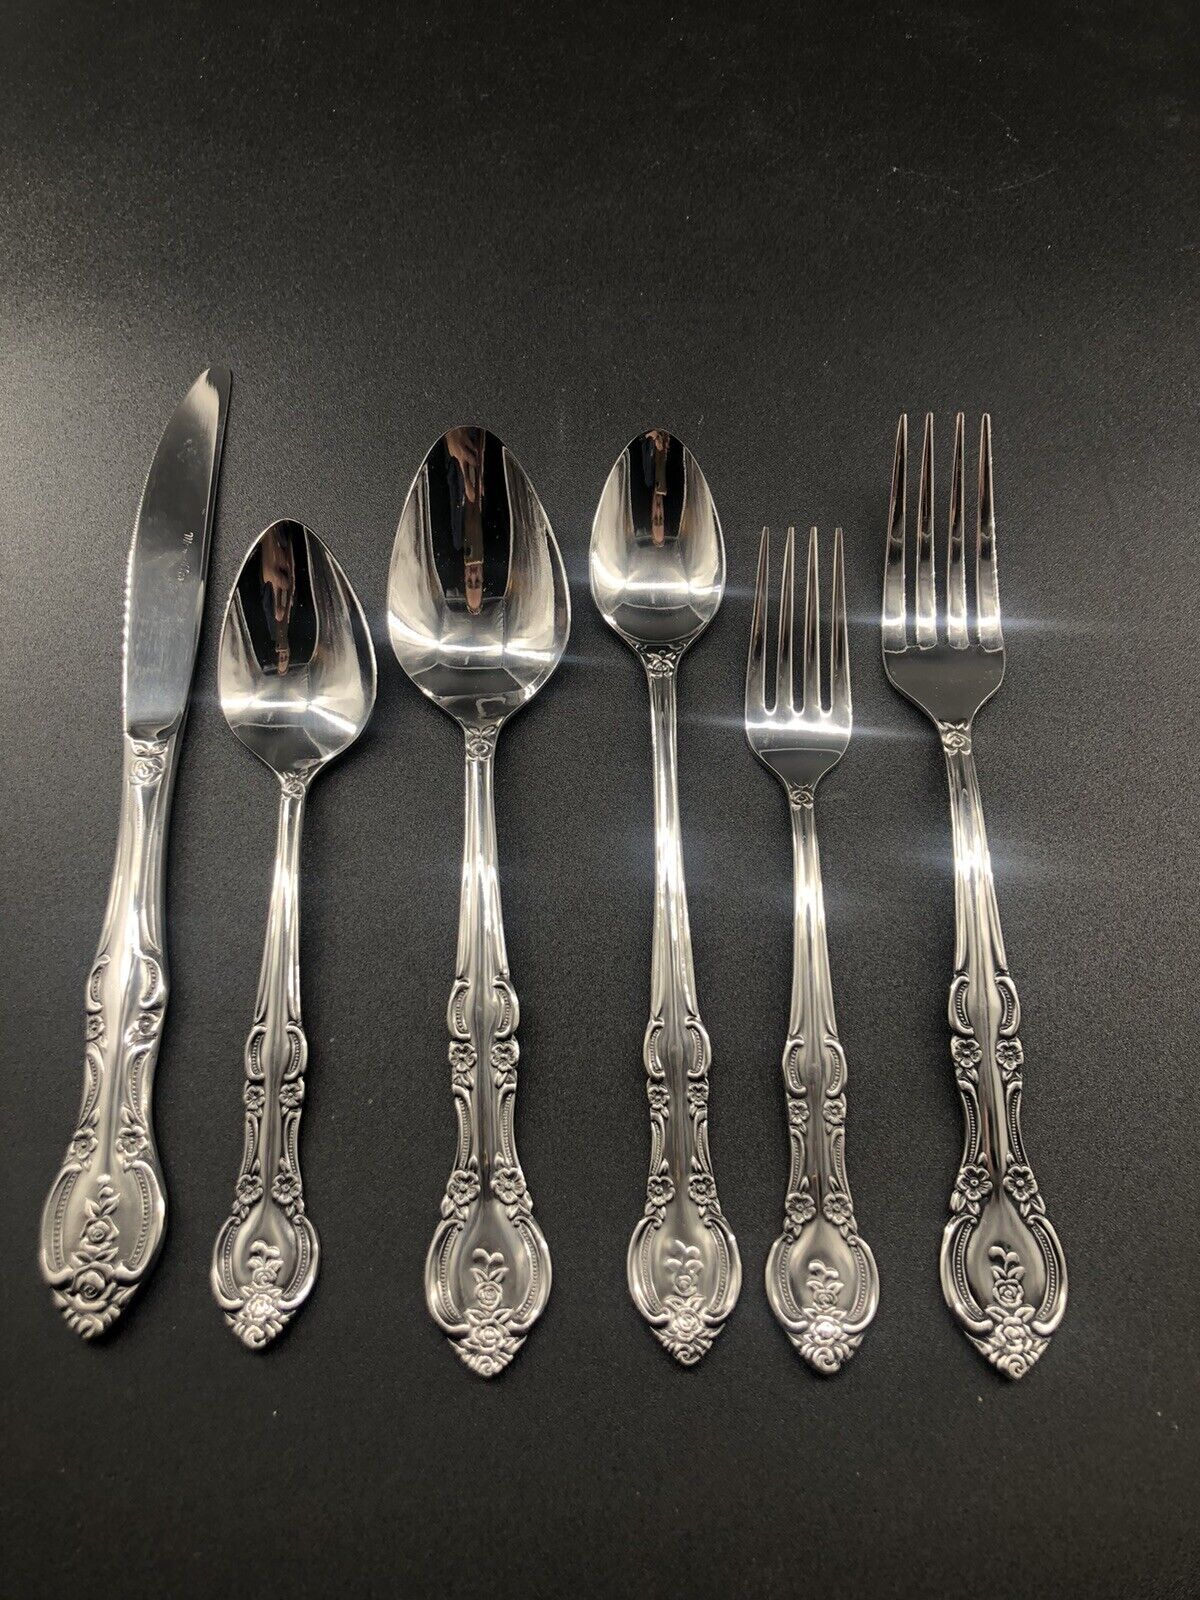 6 Piece Marseilles Pattern Stainless Steel Vtg Flatware Made In Japan Floral